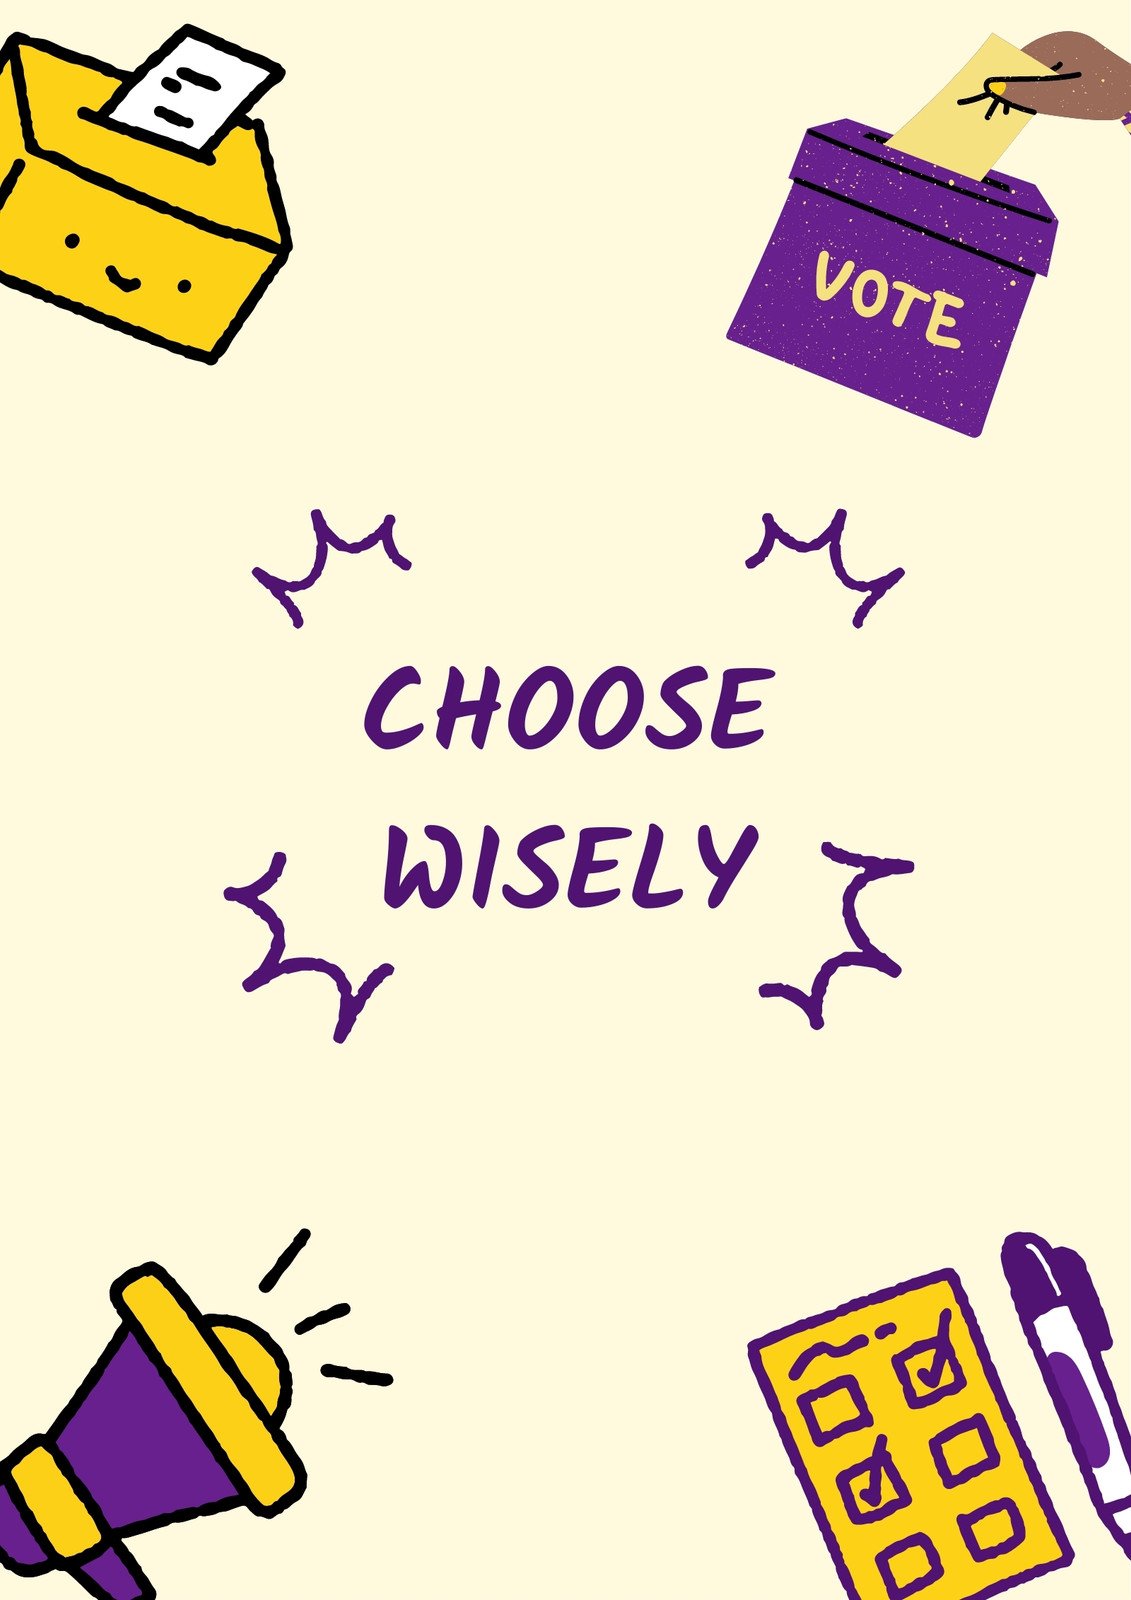 school election posters for kids